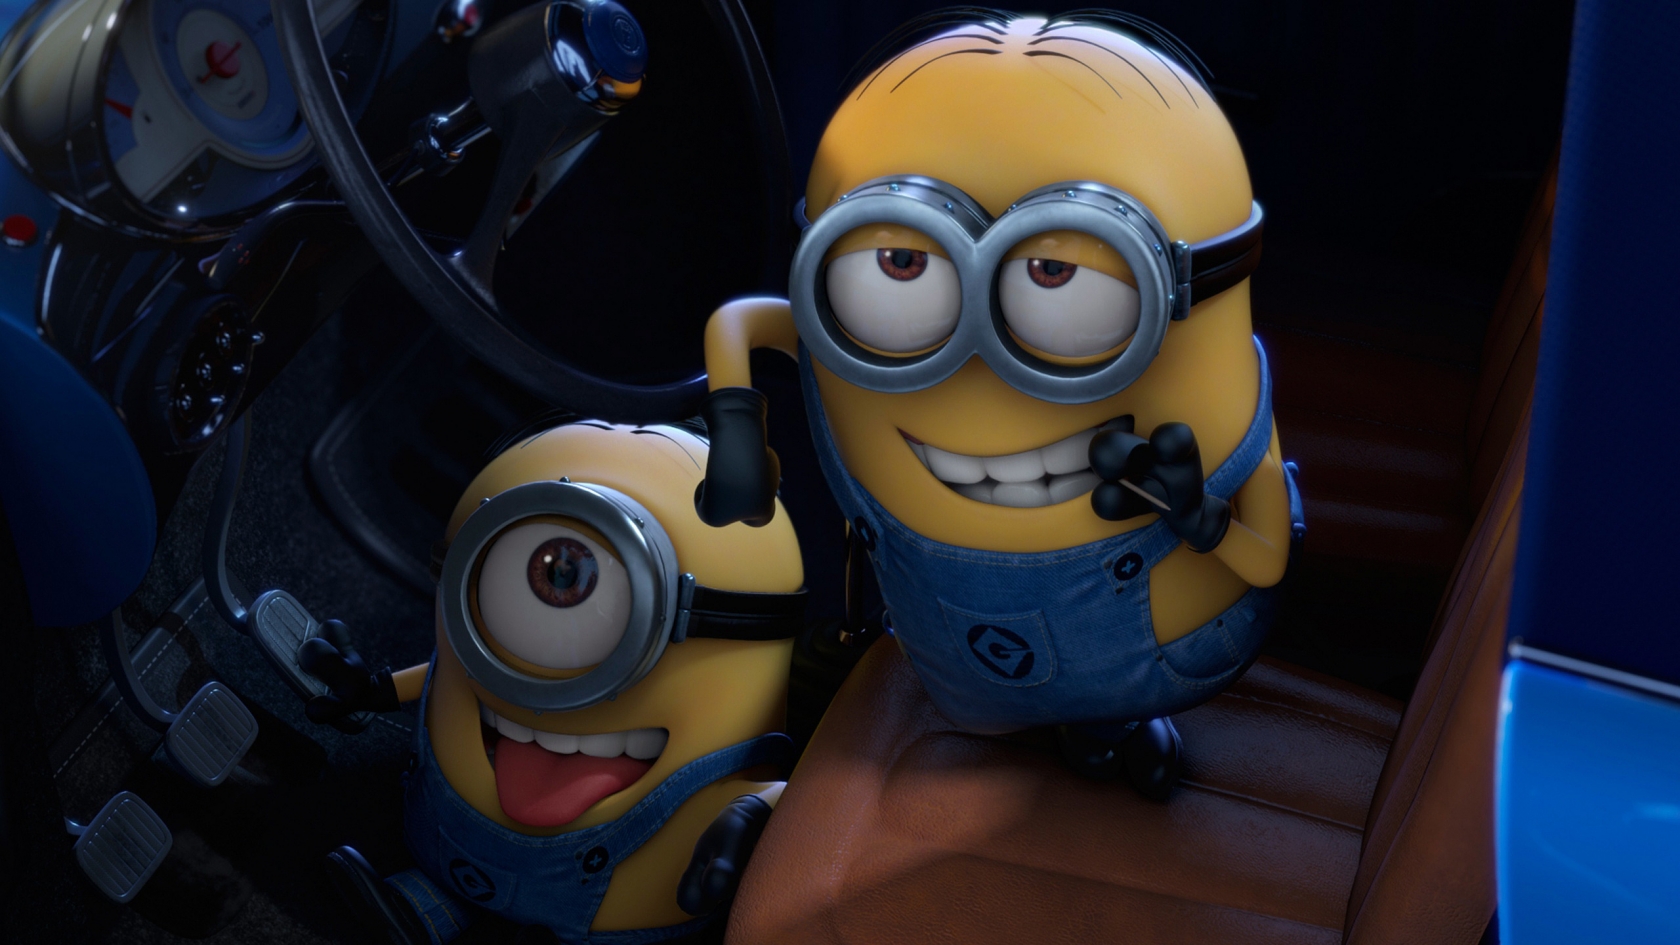 Minions for 1680 x 945 HDTV resolution